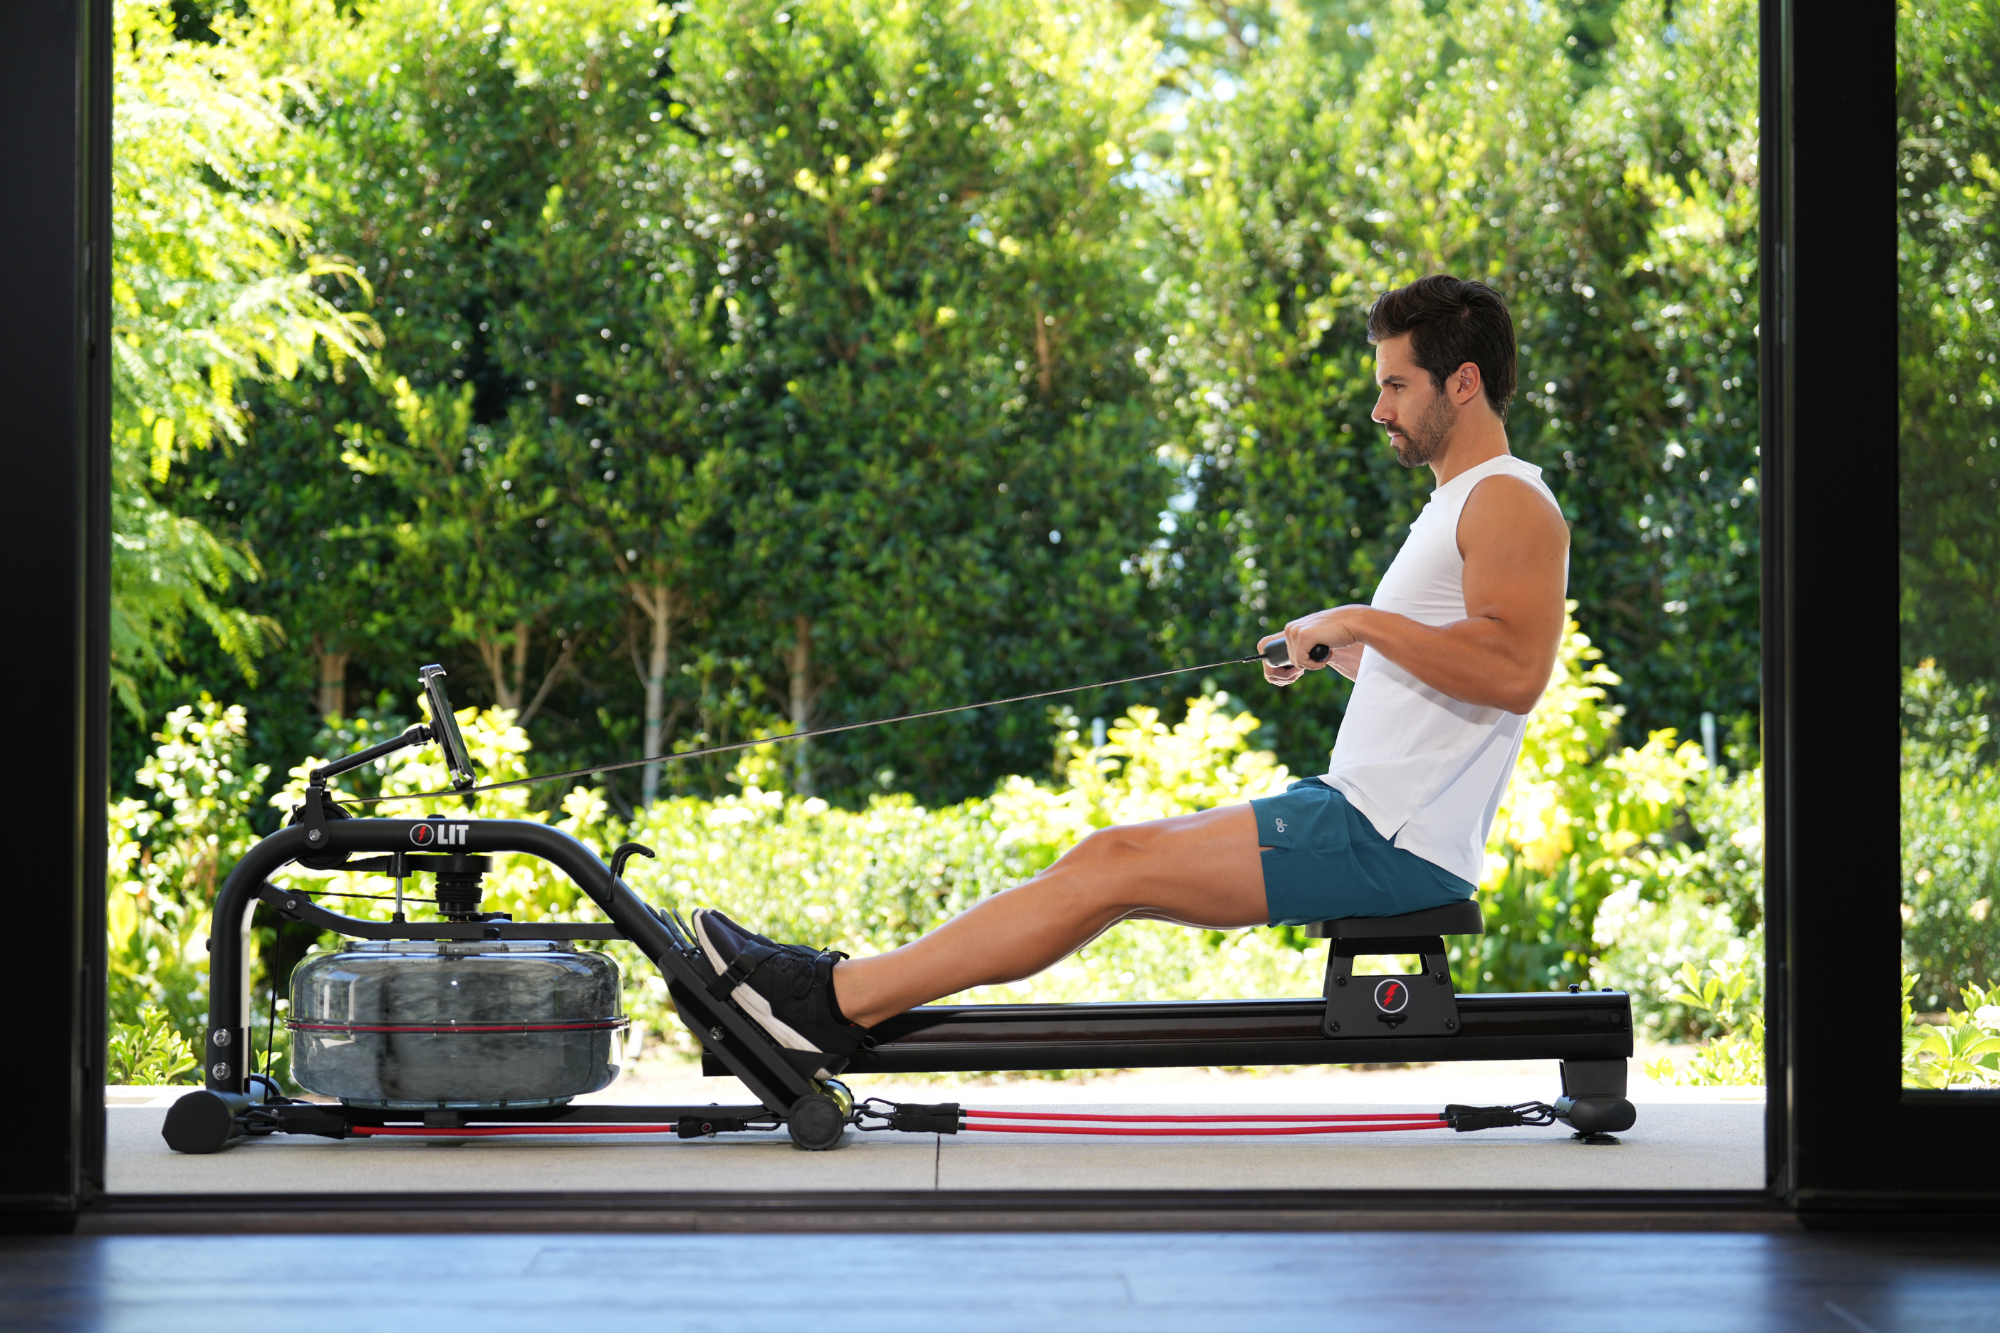 Is Rowing Machine Workout Good For Your Back? (Pros and Cons)